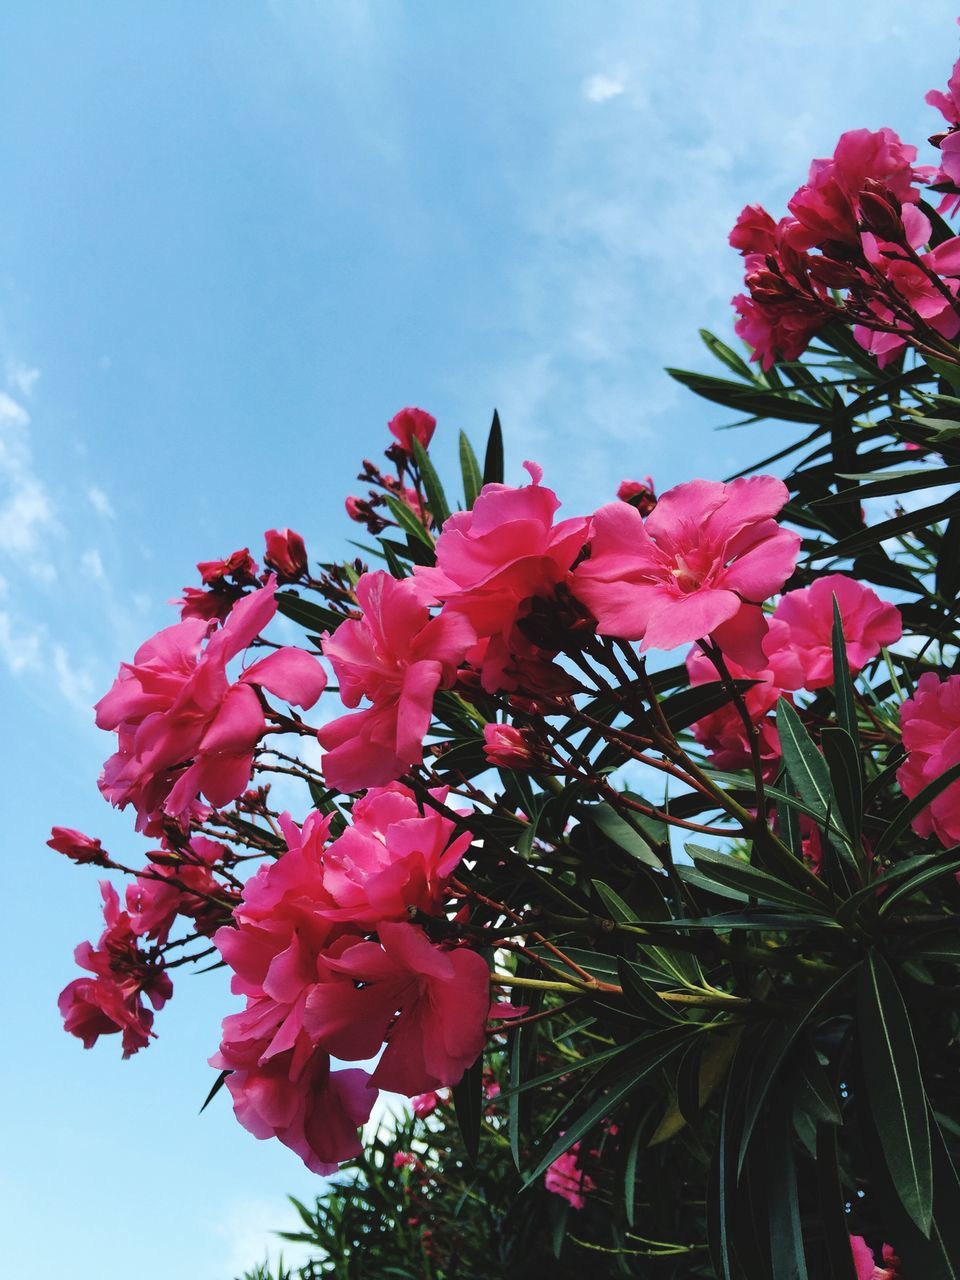 flower, low angle view, freshness, fragility, pink color, growth, petal, sky, beauty in nature, blooming, nature, flower head, in bloom, blossom, pink, red, plant, day, tree, cloud - sky